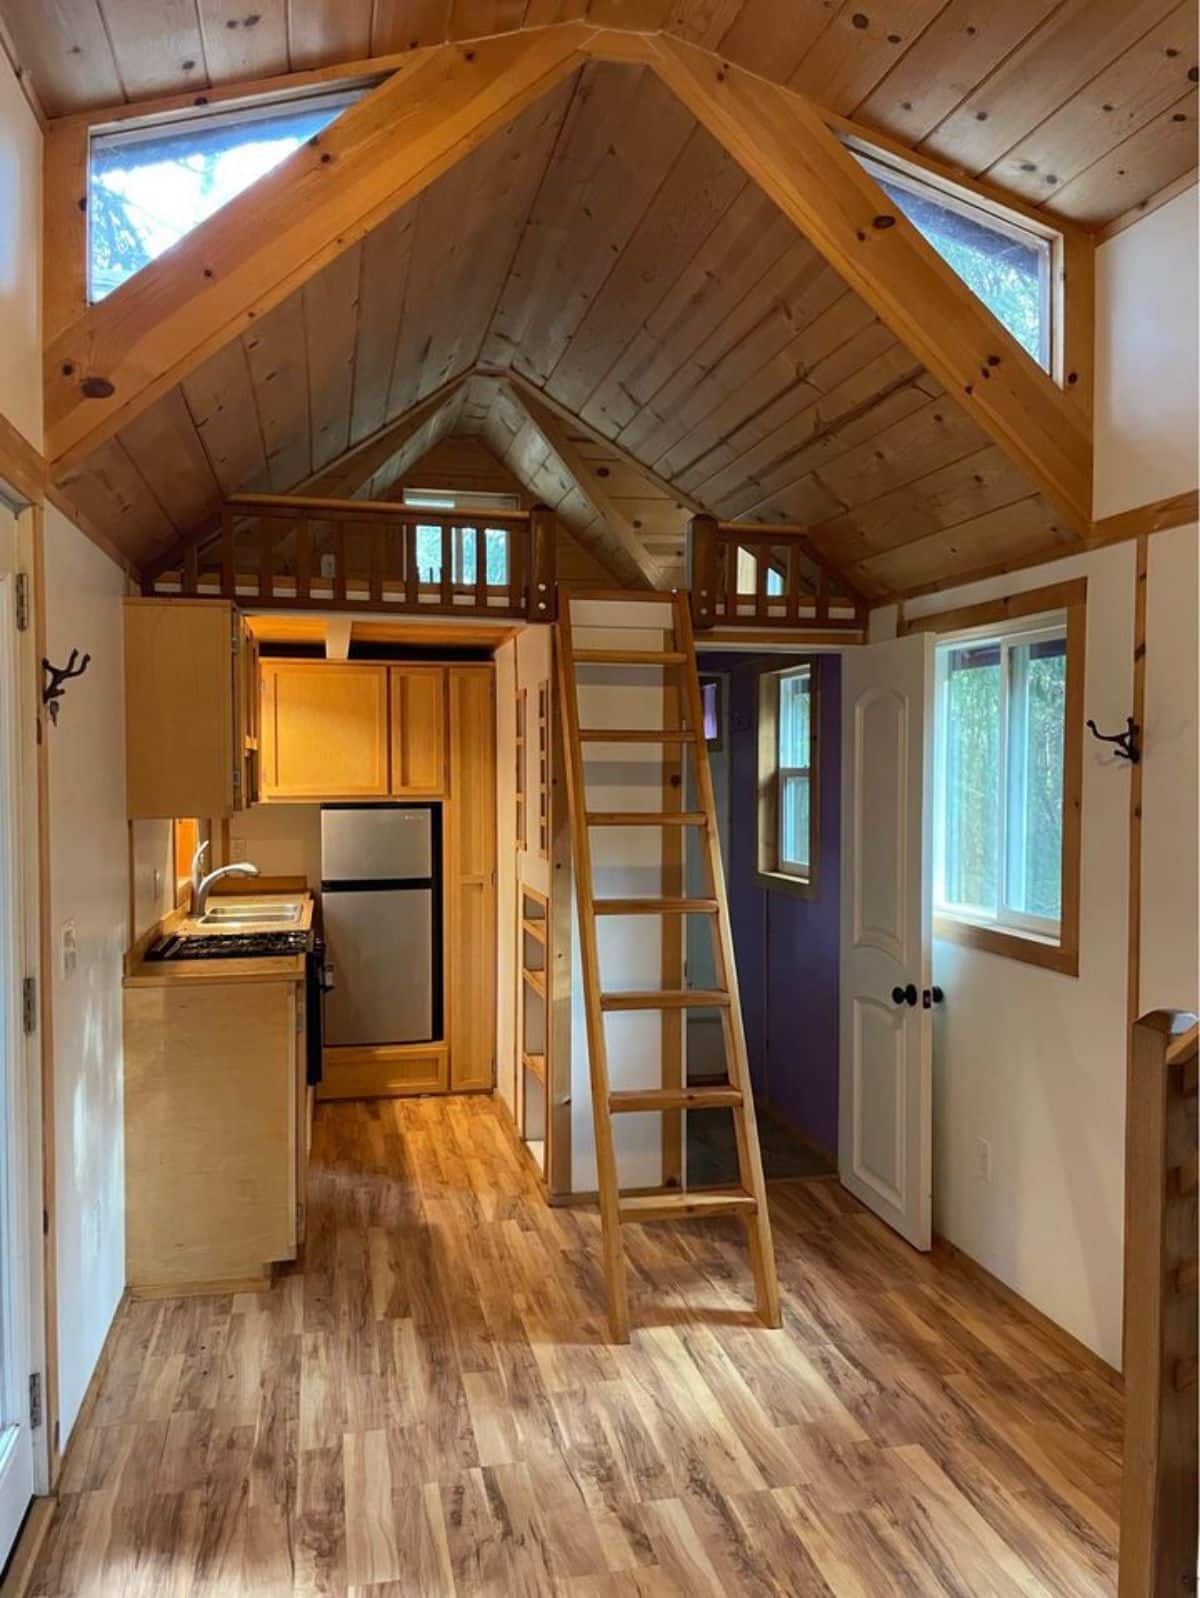 One loft is above the kitchen while another is above the living area of 27’ Tiny House With Two Lofts